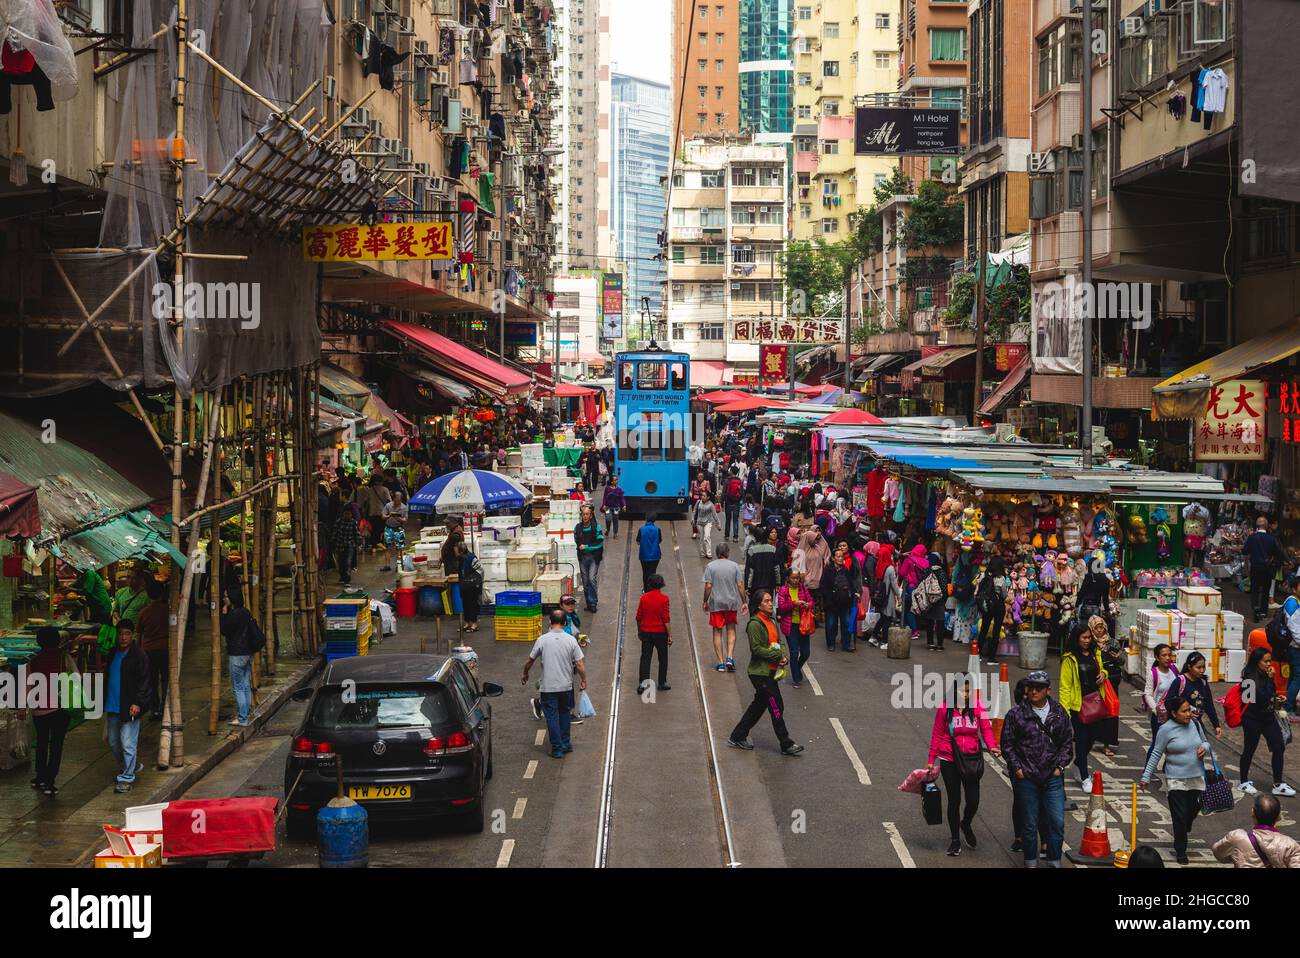 November 26, 2017: Chun Yeung Street, a big wet market with a tramline running through the middle, located at north point, hong kong, china. Stock Photo